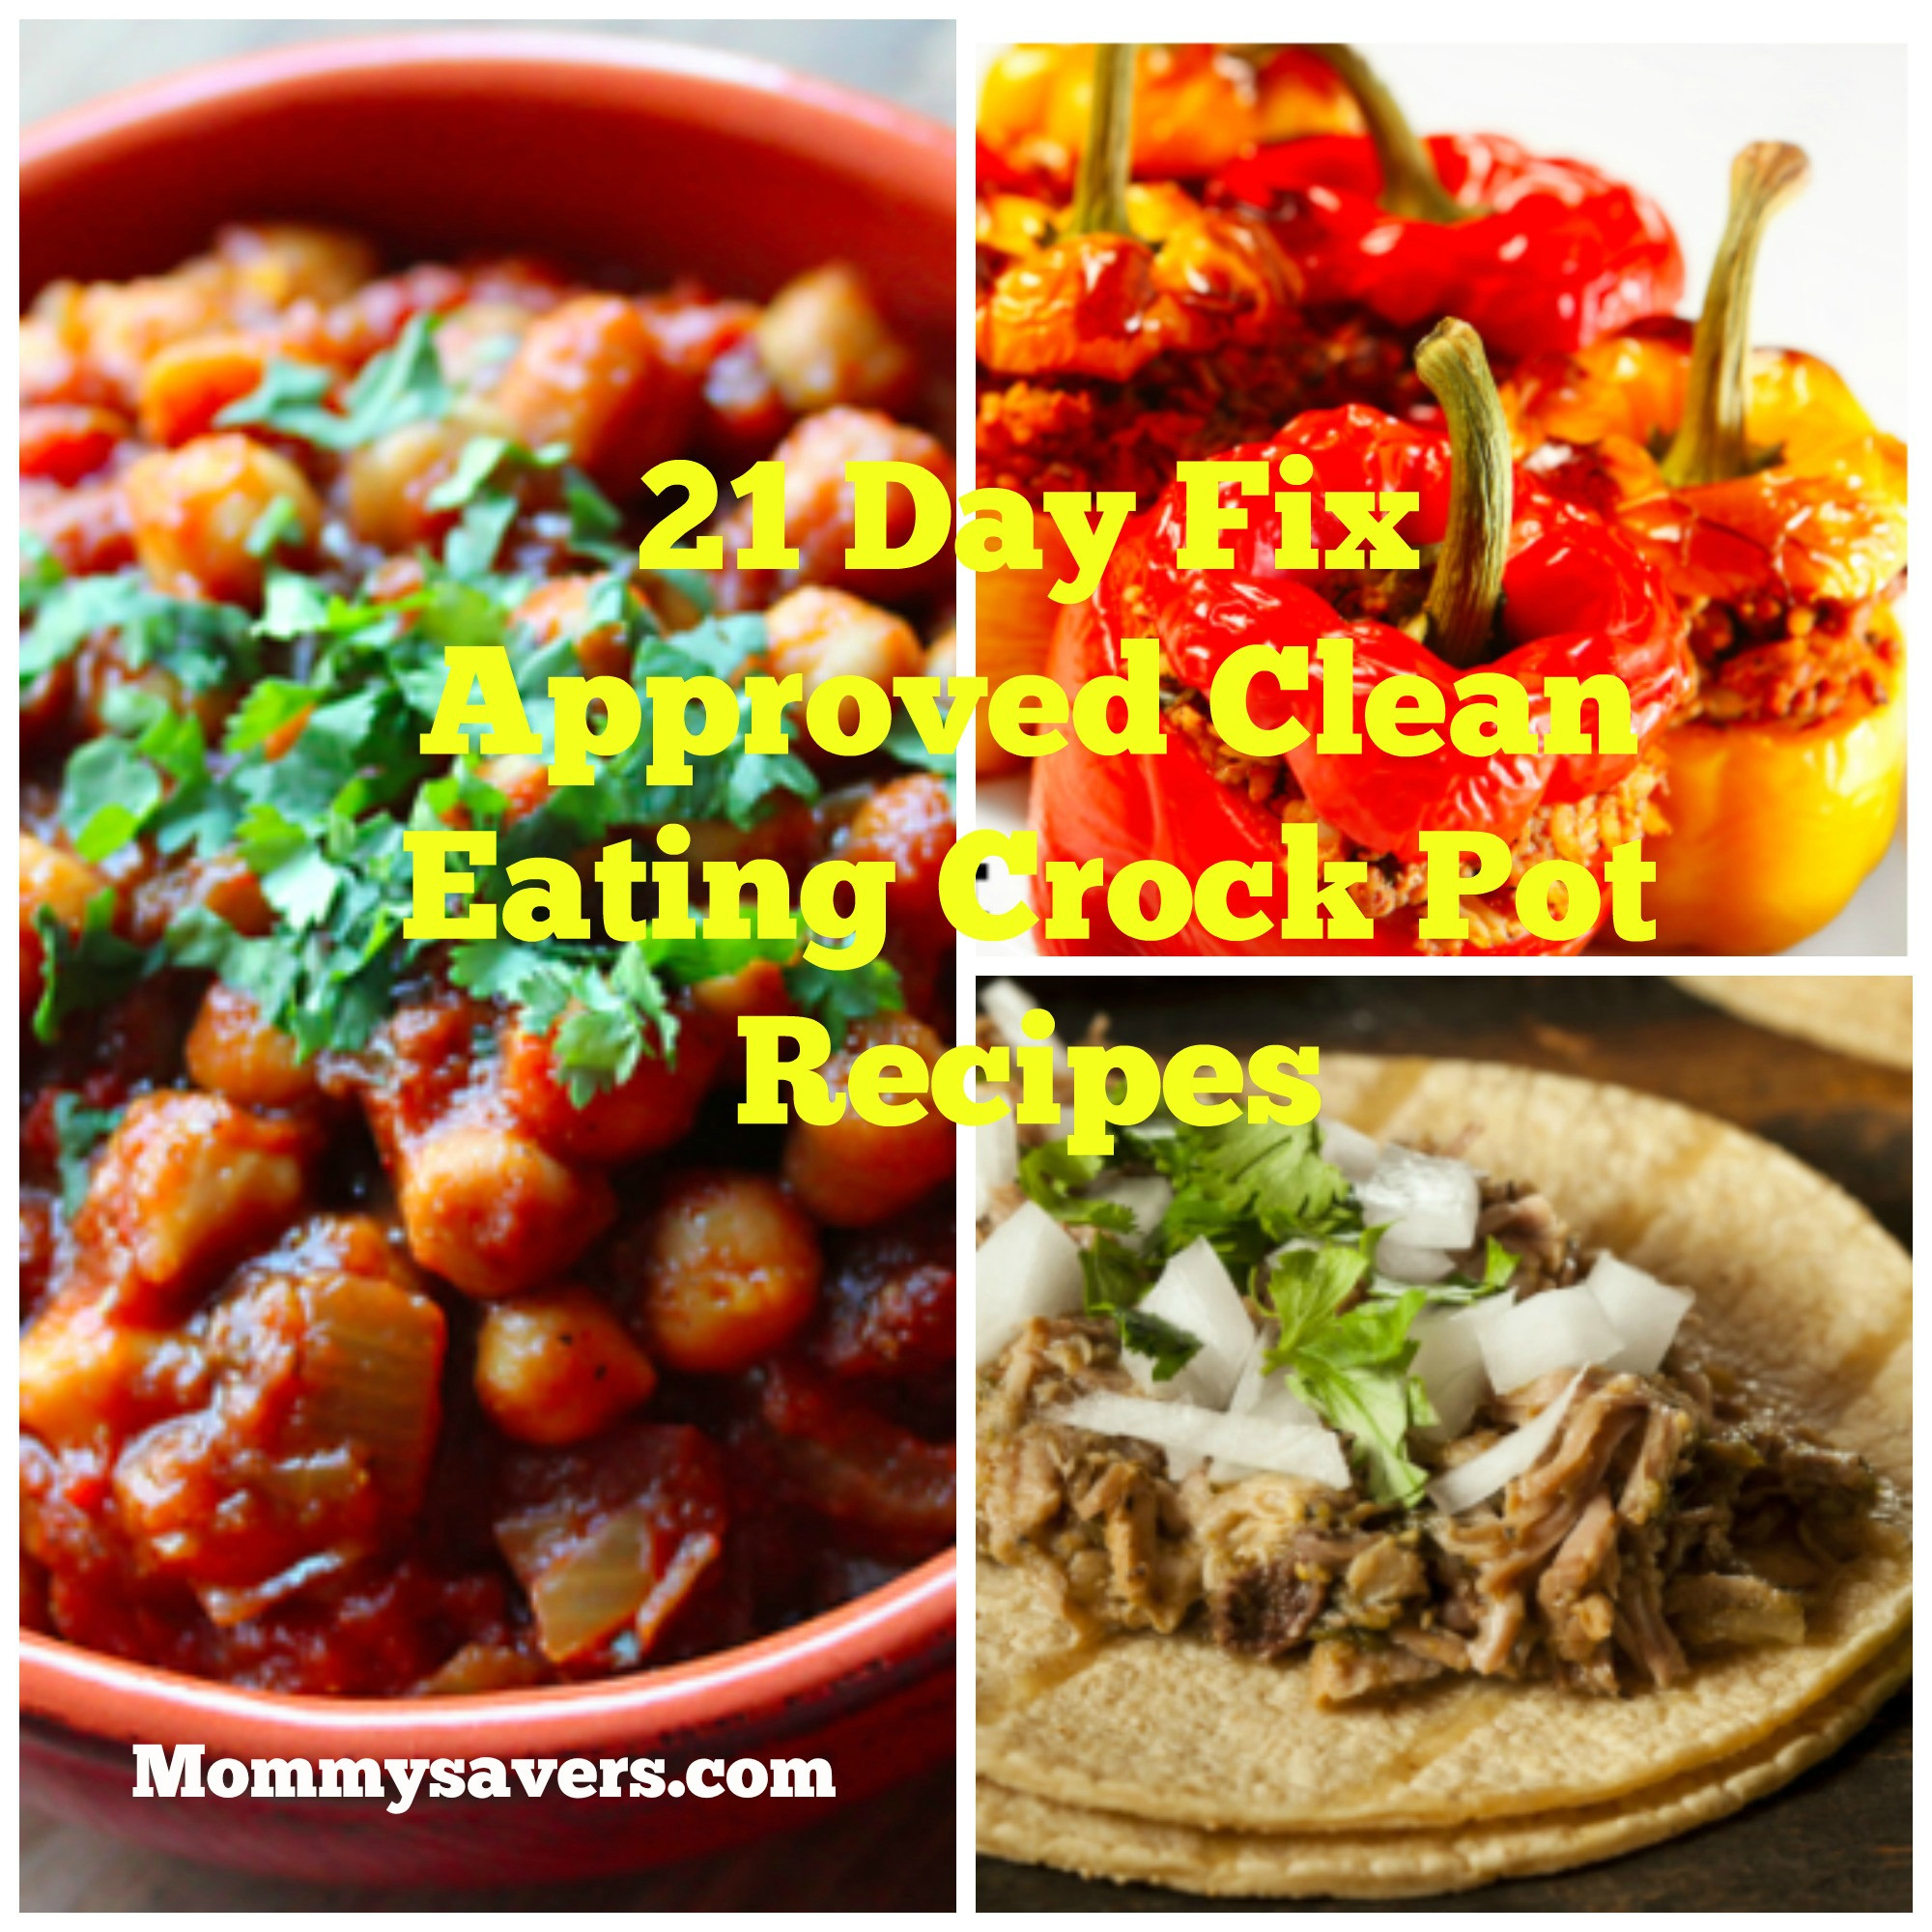 Clean Eating Crockpot Meals
 21 Day Fix Approved Clean Eating Crock Pot Recipes